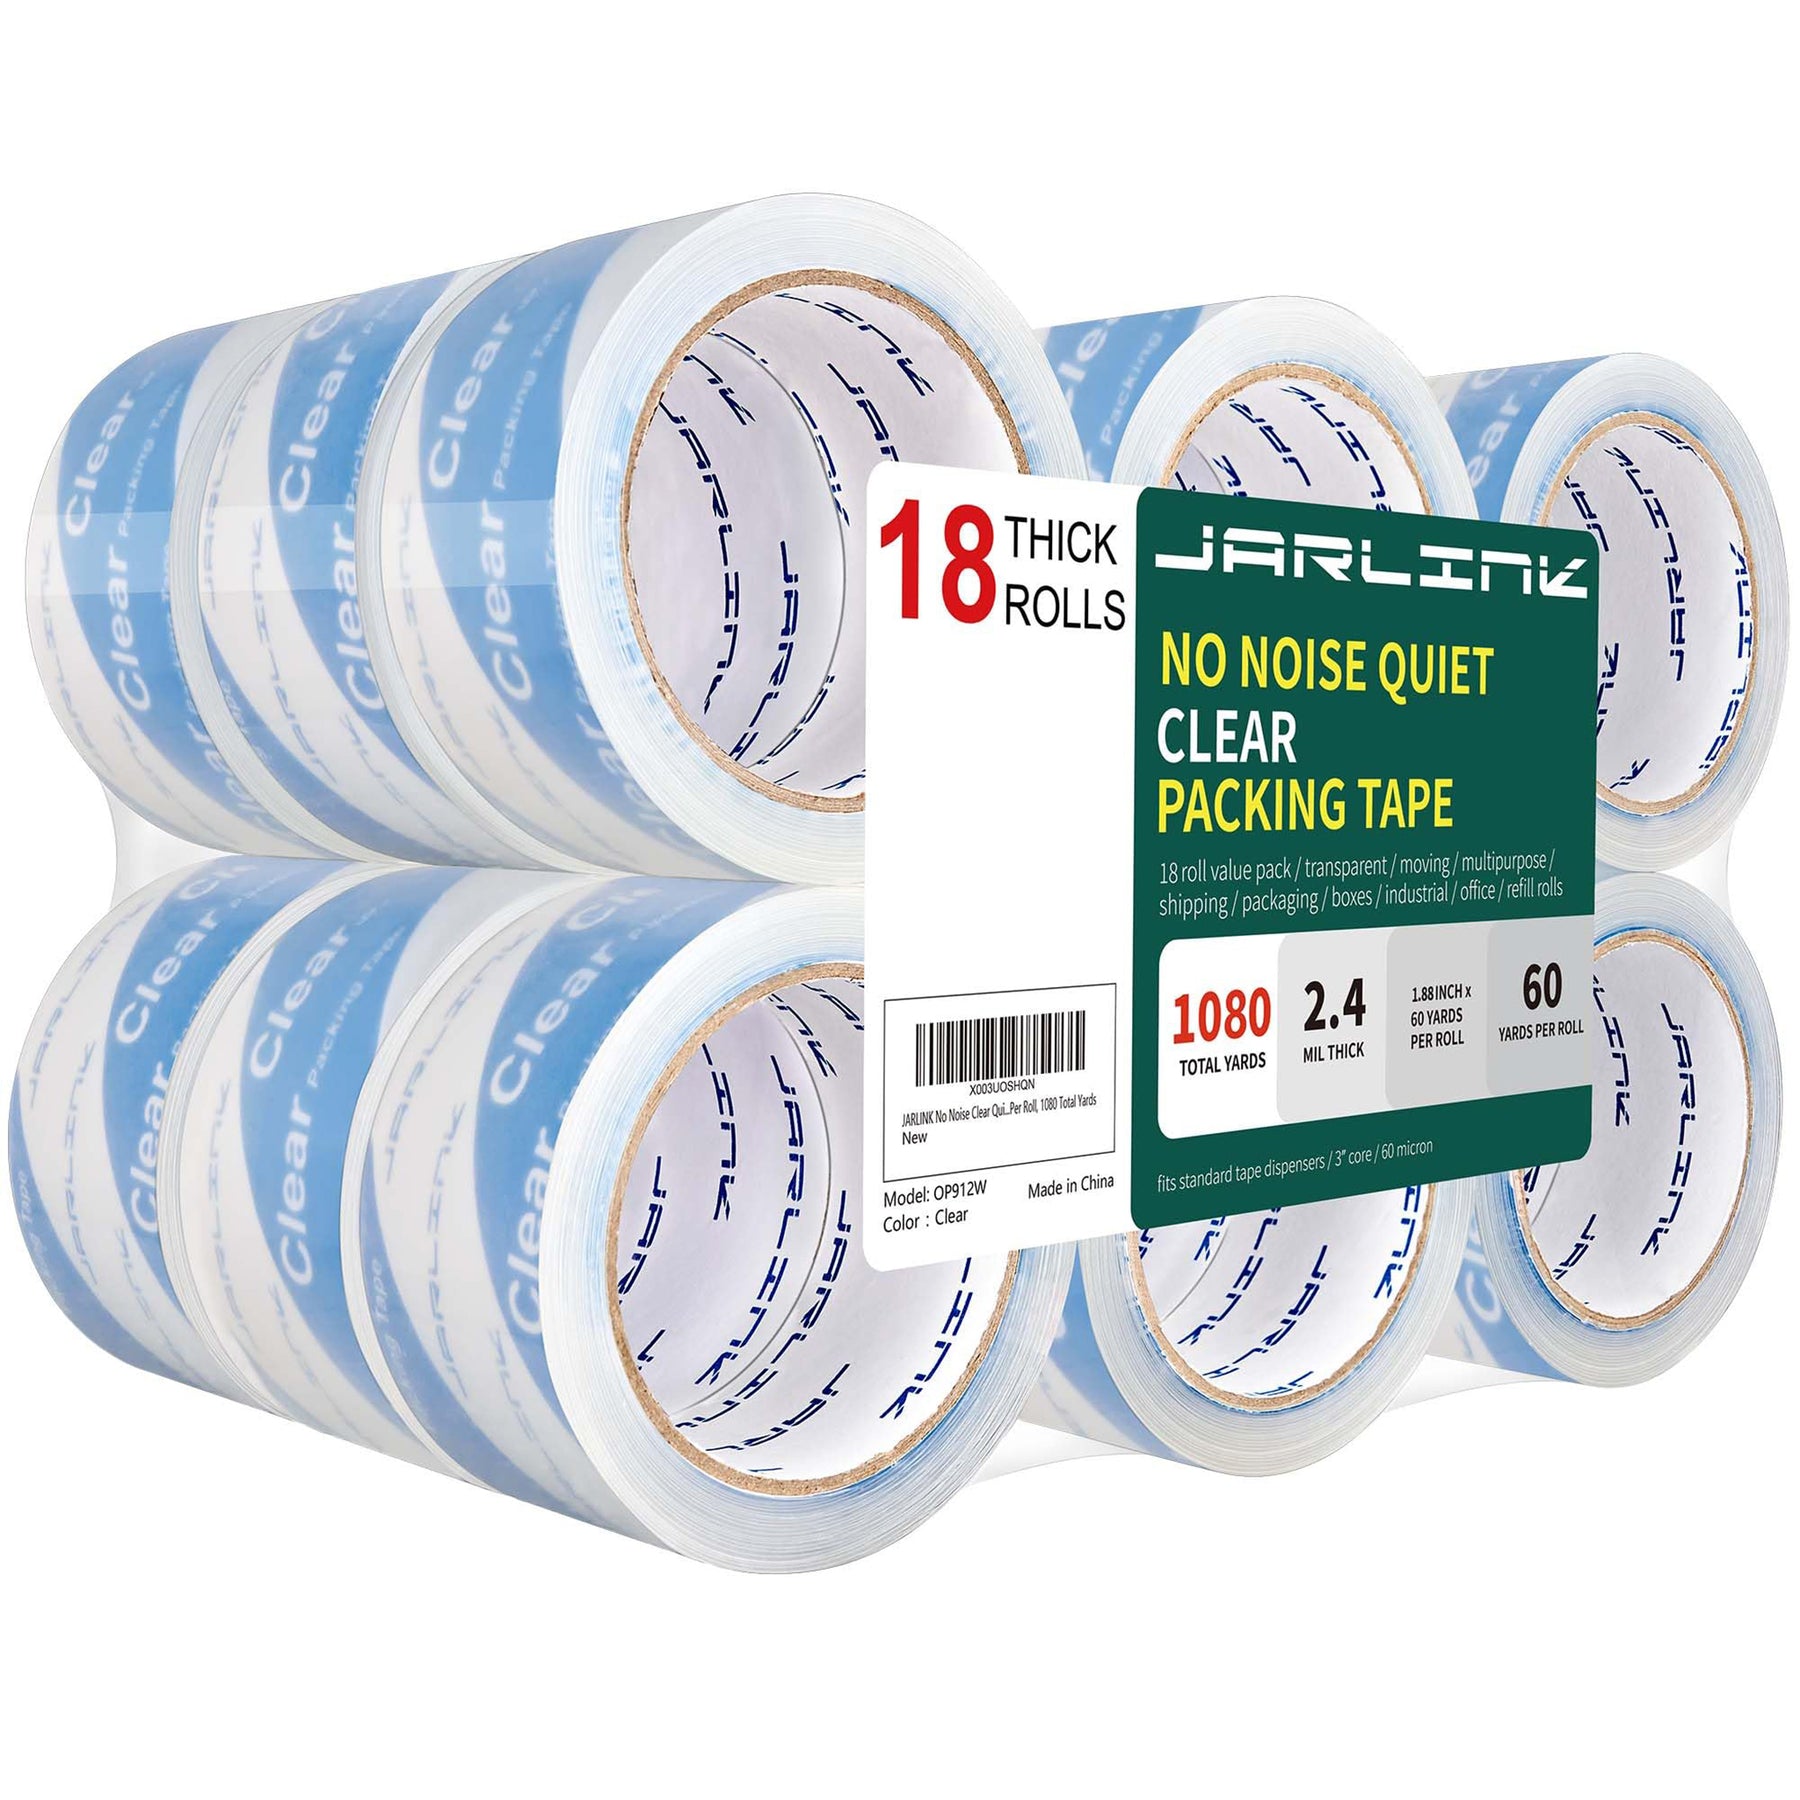 JARLINK No Noise Clear Quiet Packing Tape, Heavy Duty Packaging Tape for Shipping Packaging Moving Sealing, 2.4mil Thick, 1.88 inches Wide, 60 Yards Per Roll